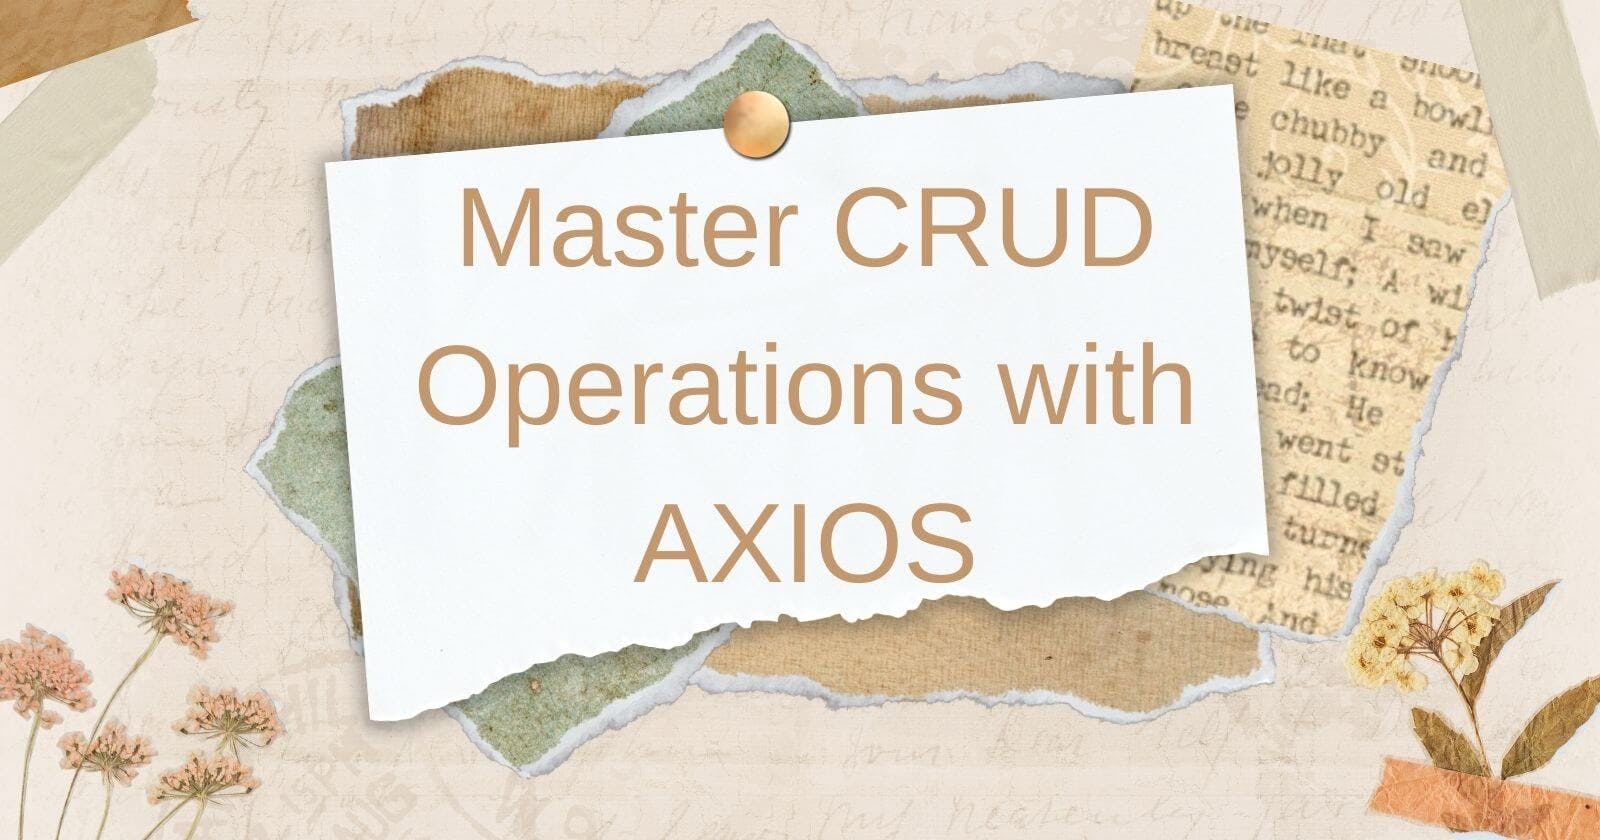 Mastering CRUD Operation with AXIOS